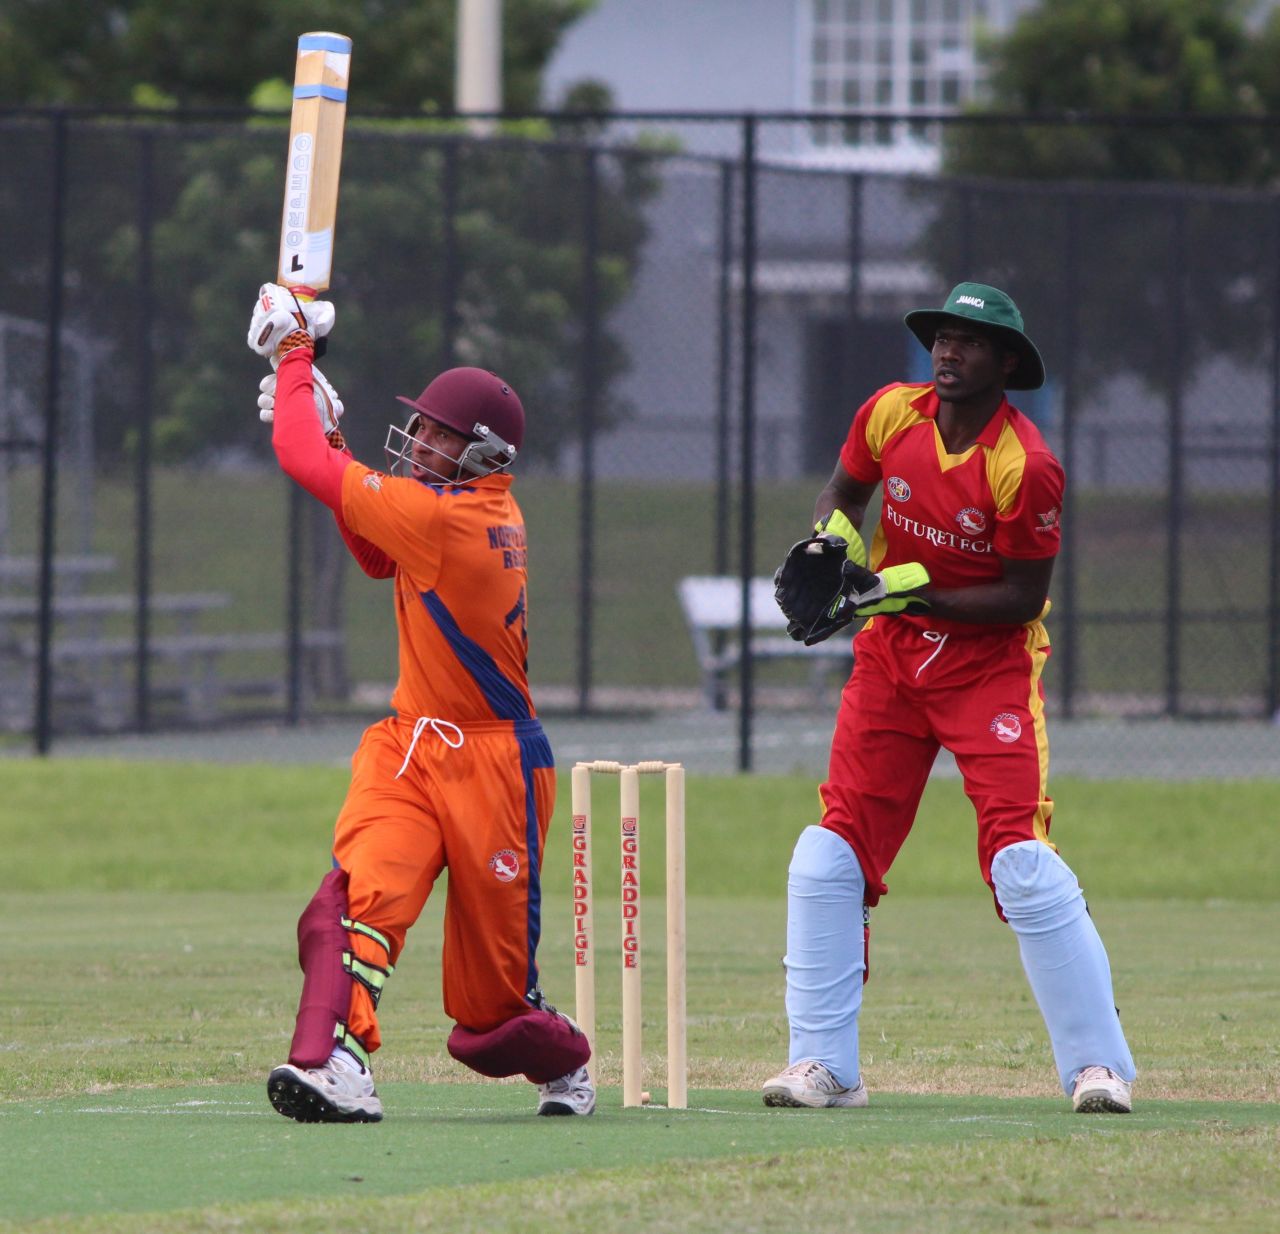 Akil Husbands hits a six over midwicket, North East Region v New York Region, USACA T20 National Championship, Lauderhill, August 14, 2014